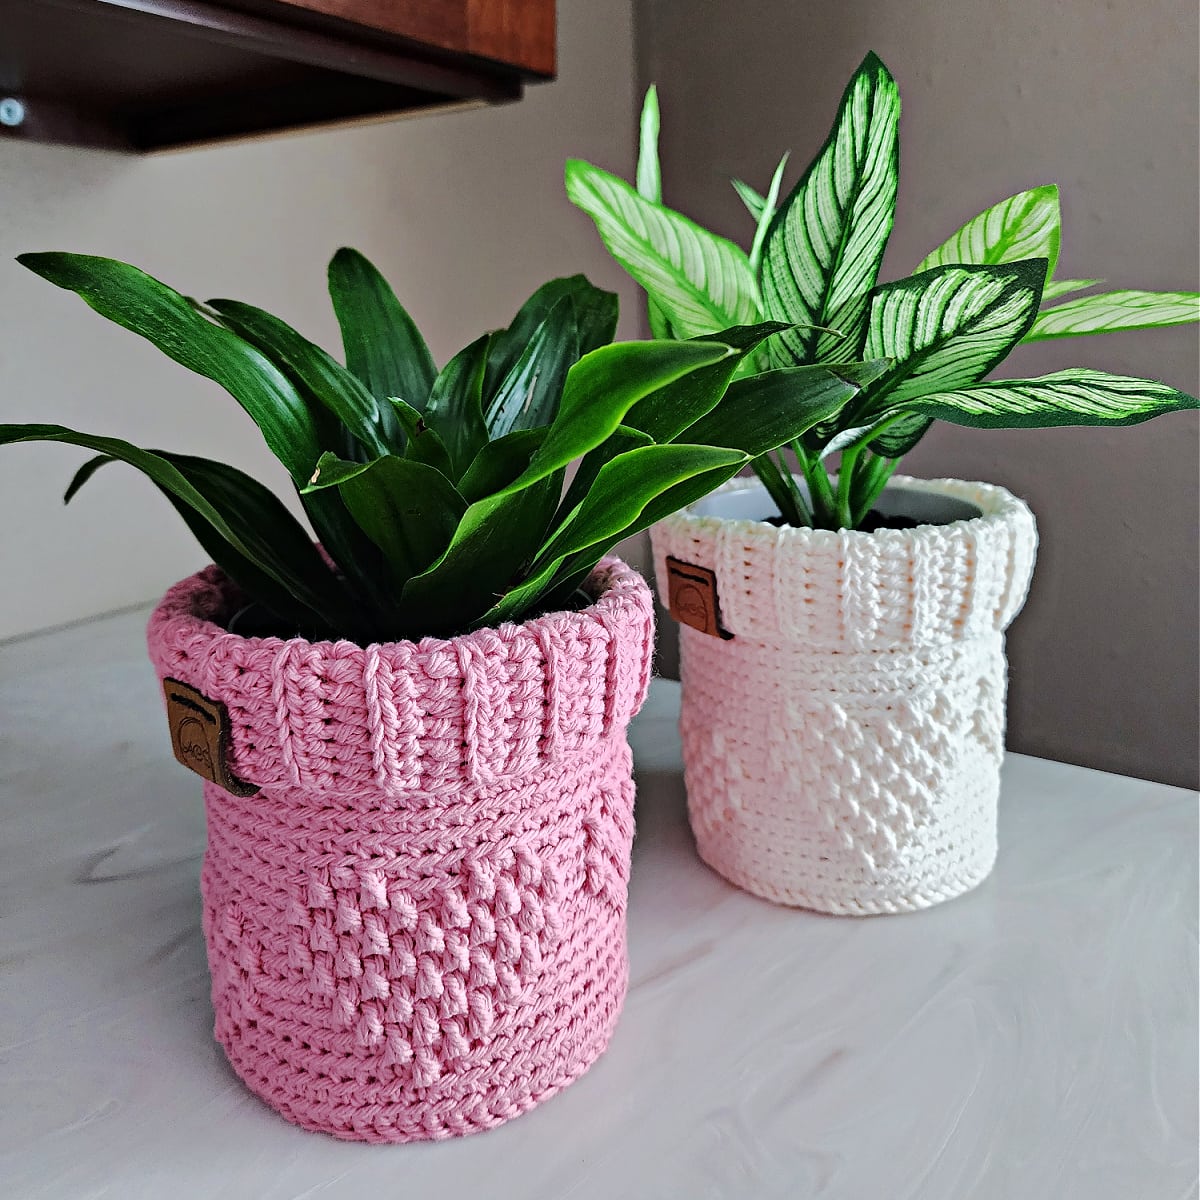 Pink and cream color crochet plant pot cover holding two indoor plants sitting on a marbled countertop.